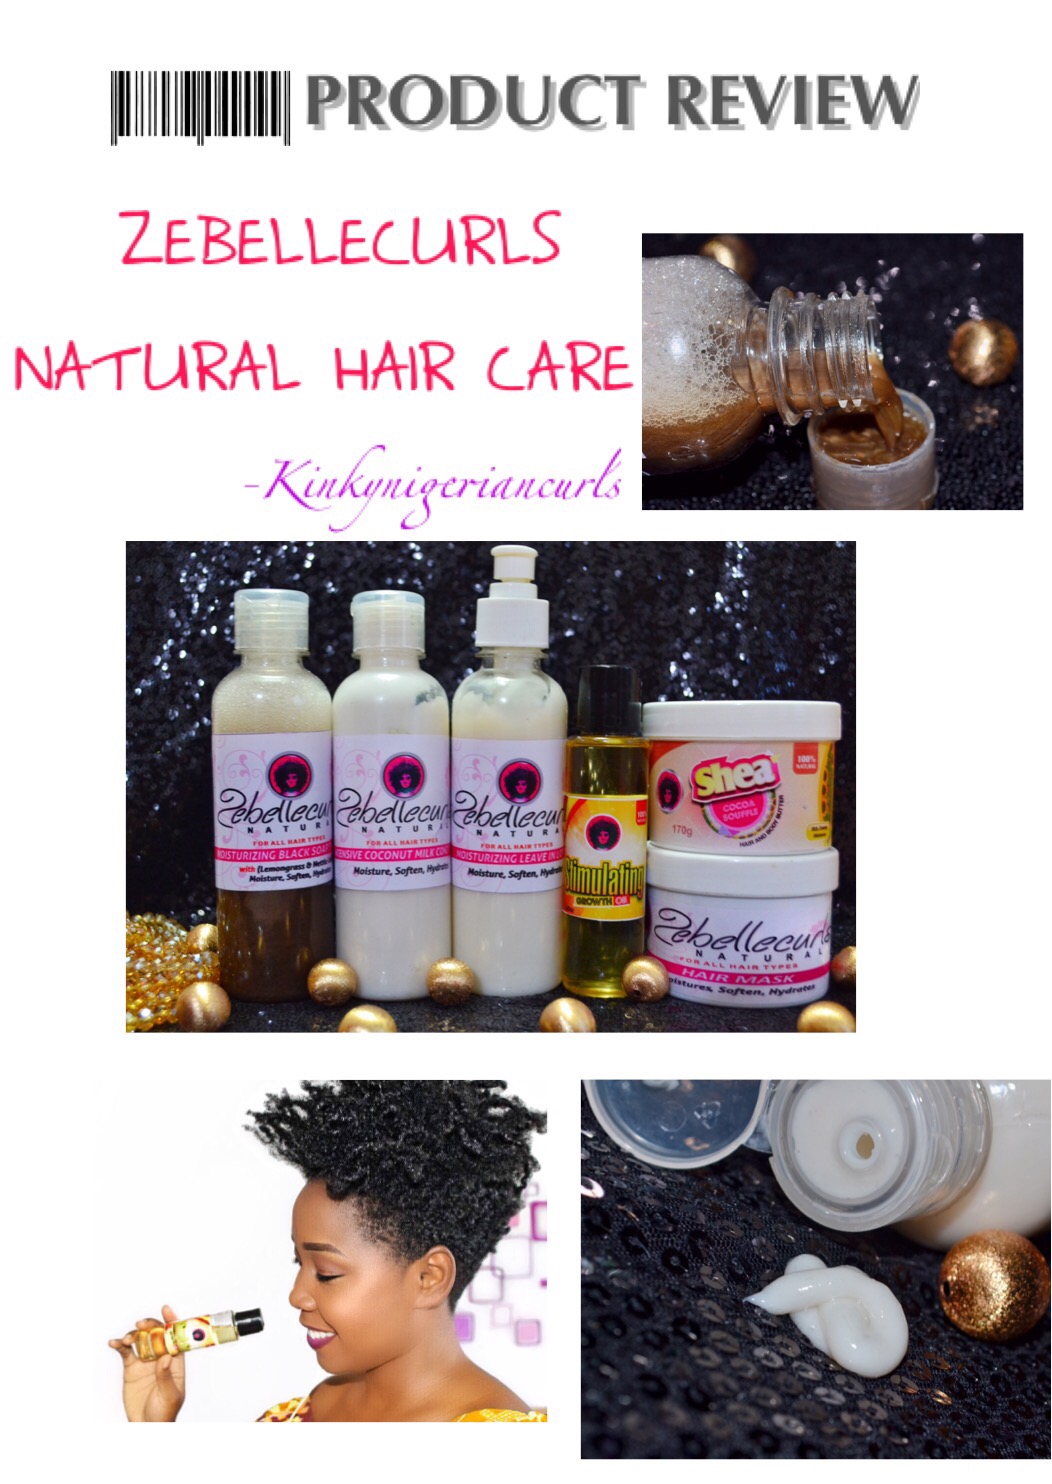 PRODUCT REVIEW: ZEBELLECURLS NATURAL HAIR CARE | Ellpuggy's Blog